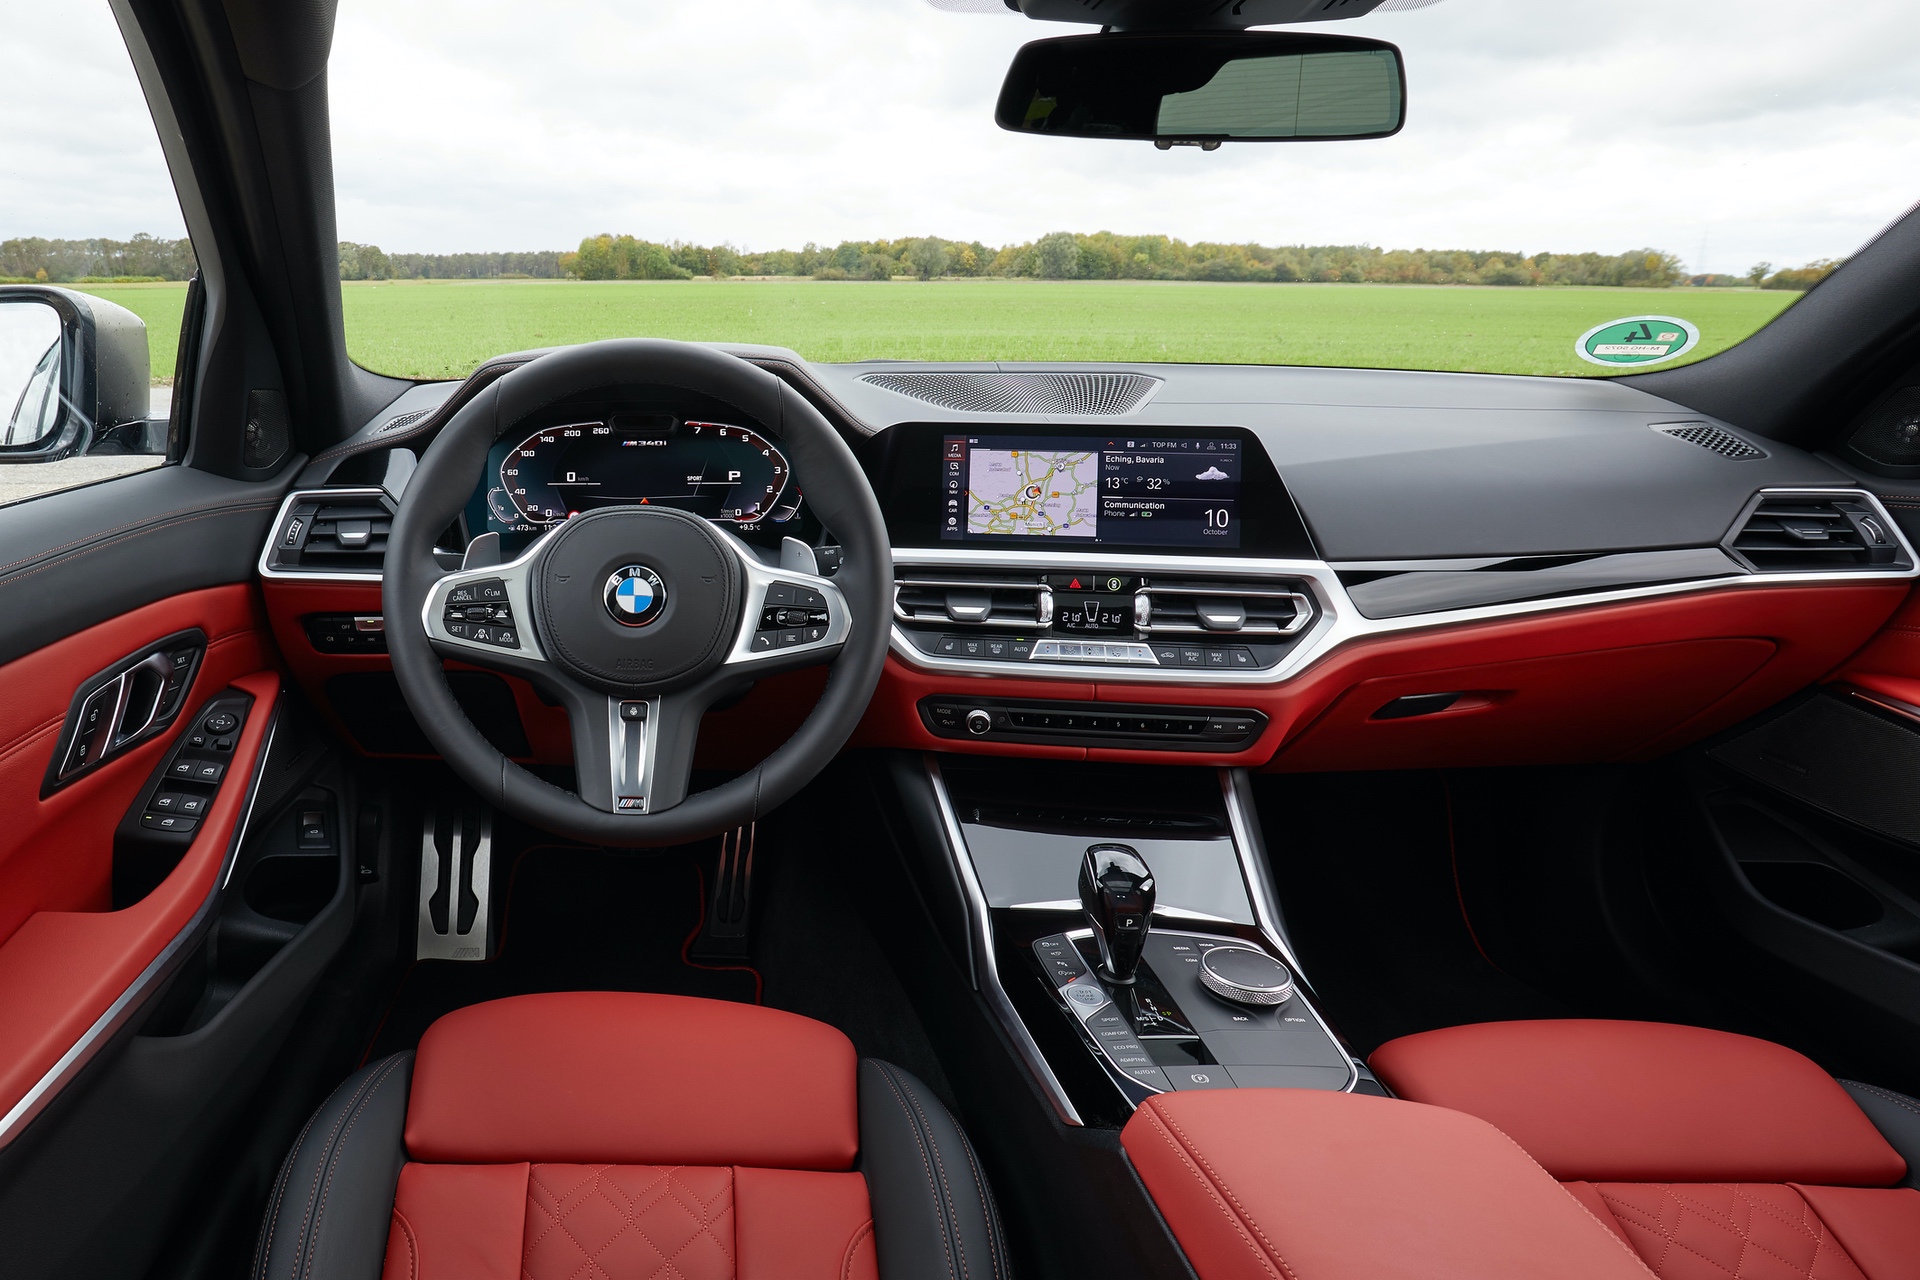 Know Your Leather: Here are the different types of BMW Leather Options